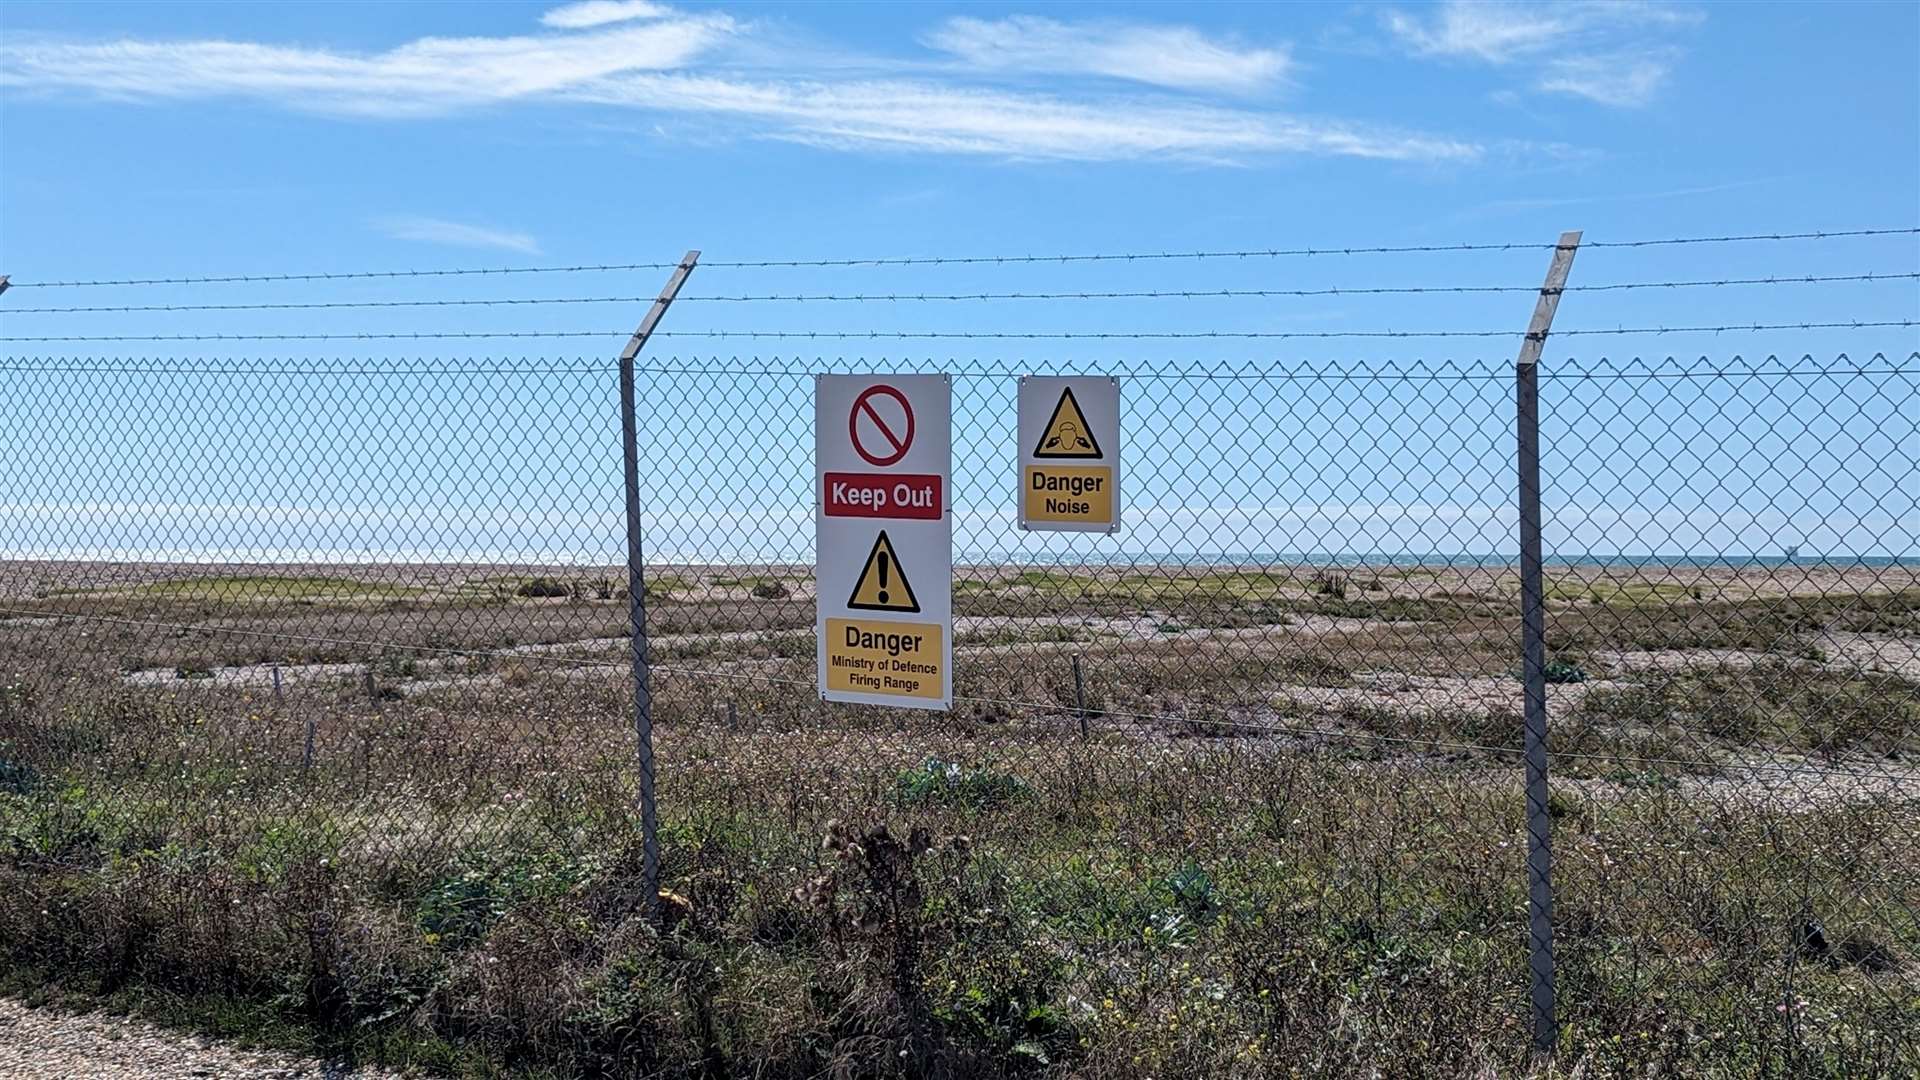 Warning signs at the edge of the Lydd firing ranges